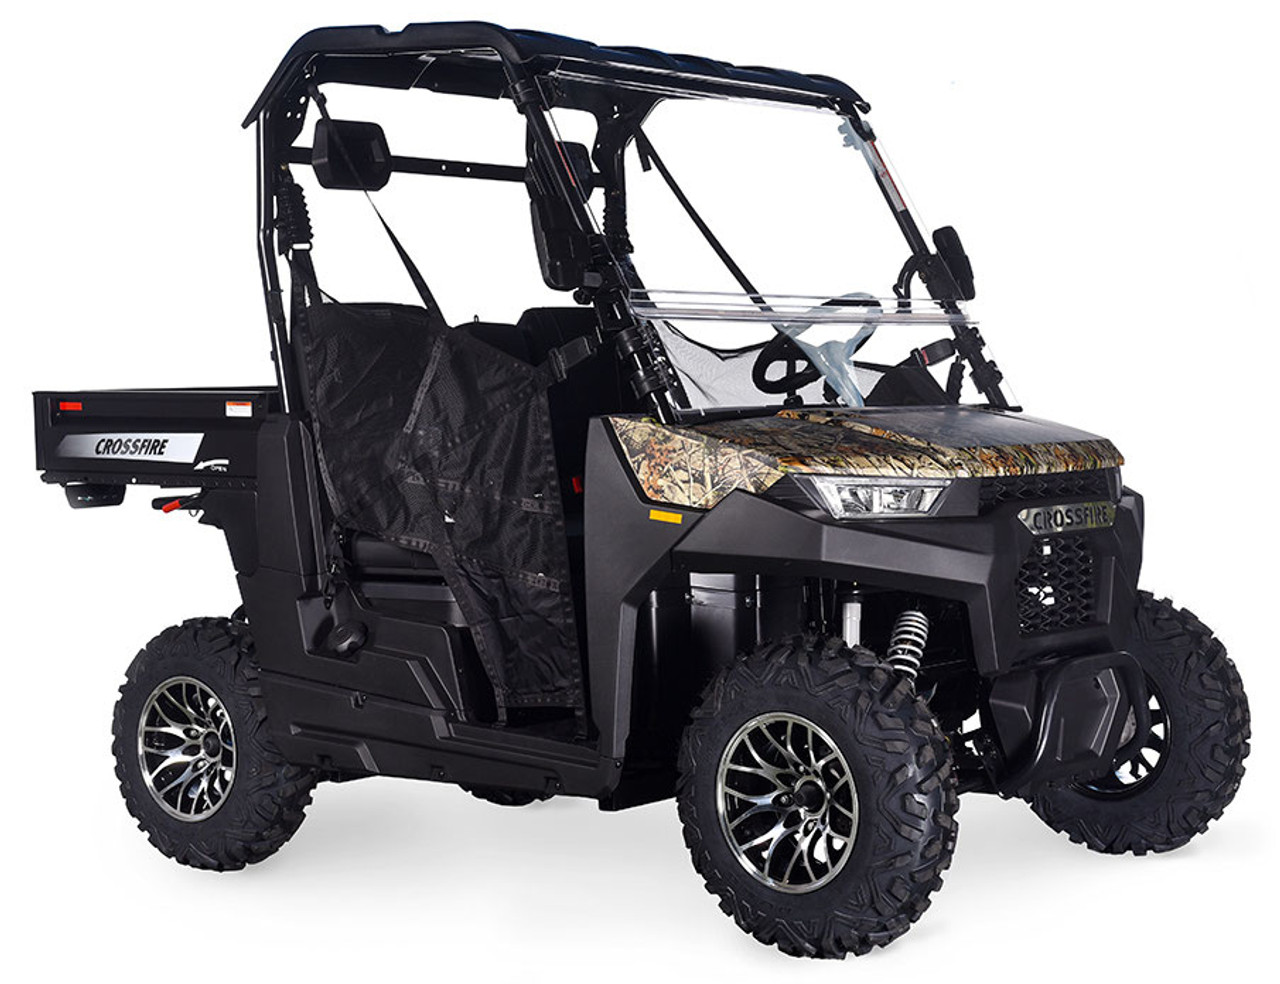 New Crossfire 200 EFI - Dump Bed UTV Free windshield - Fully Assembled and Tested